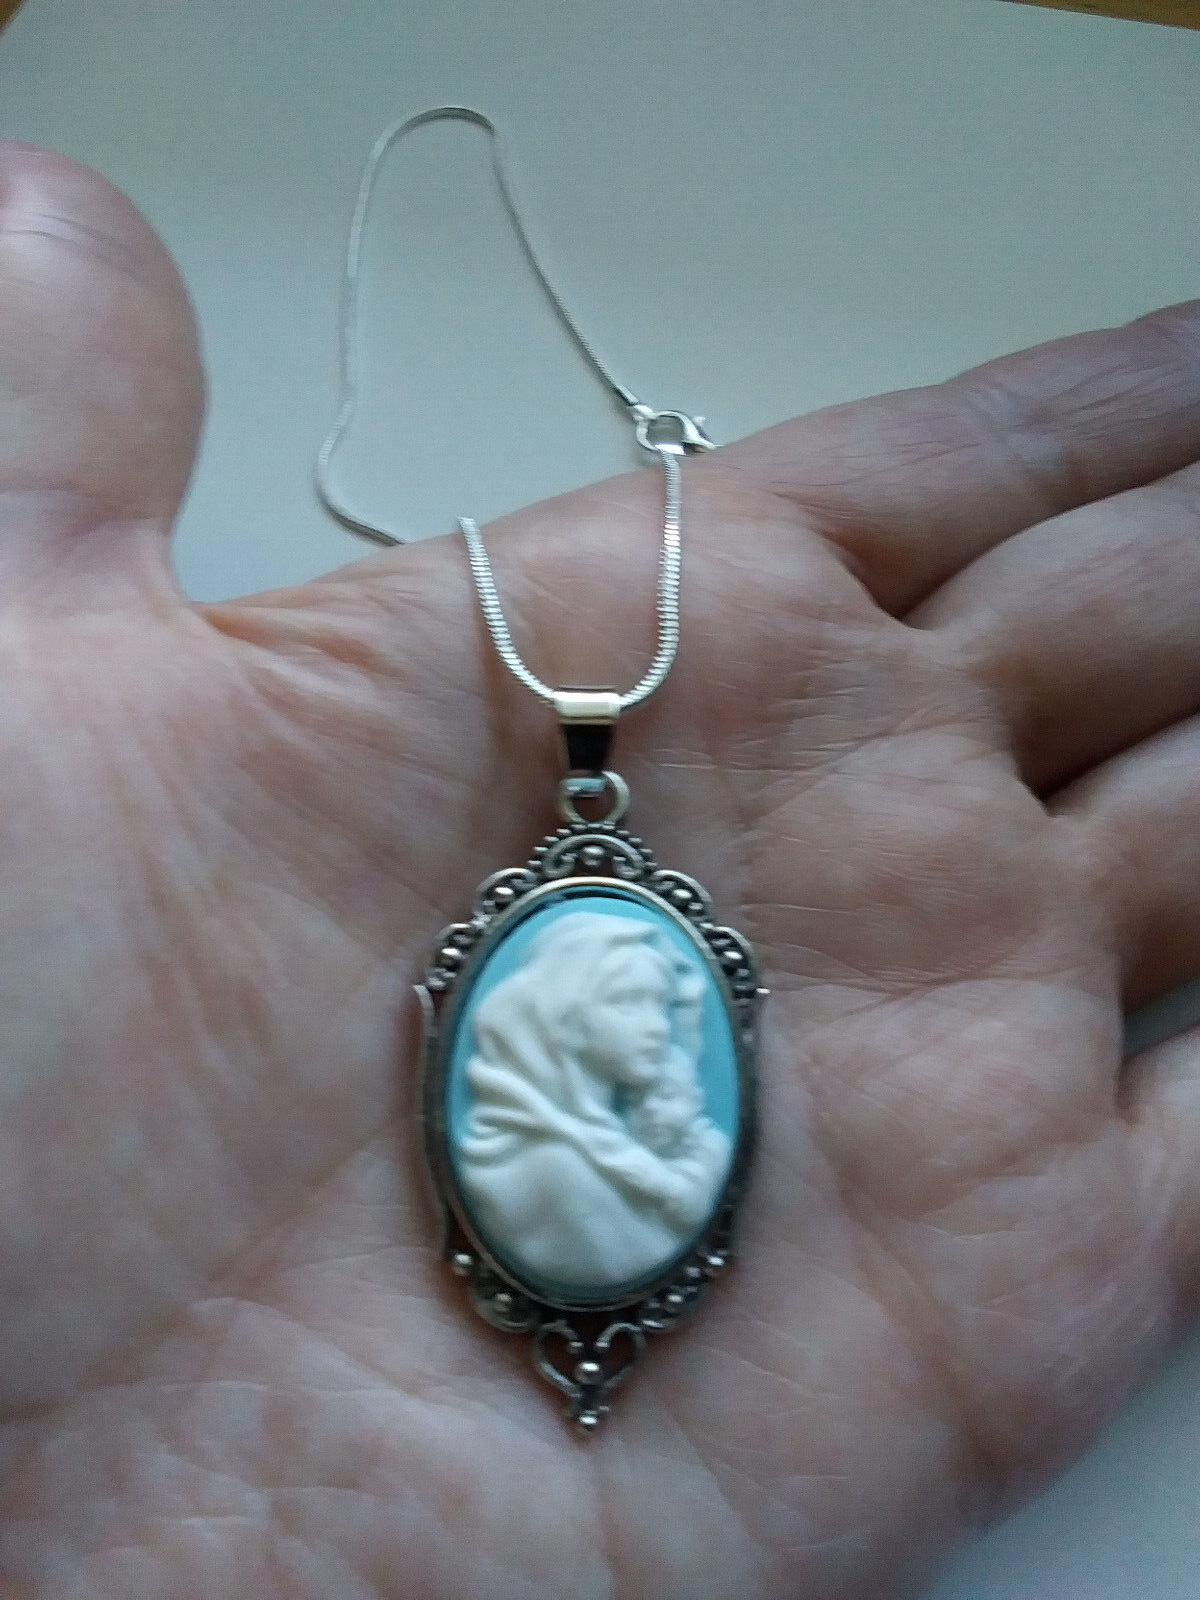 Mary Madonna & Child Pendant Wedgewood Blue Cameo necklace 925 sterling silver Handmade